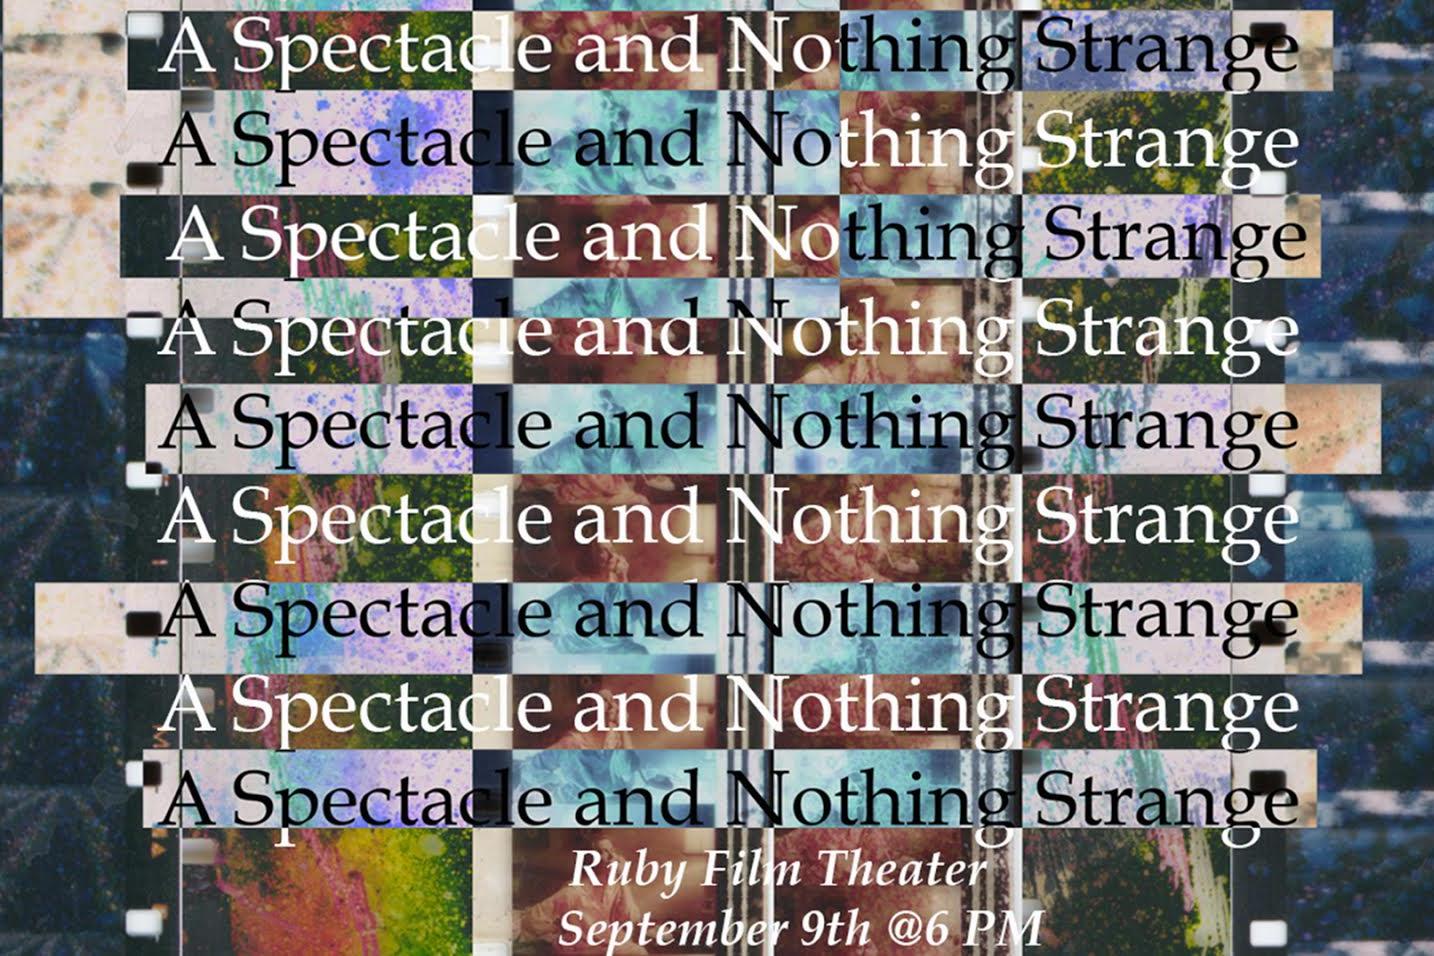 &quot;A Spectacle and Nothing Strange&quot; - Ruby Film Theater, September 9th at 6pm